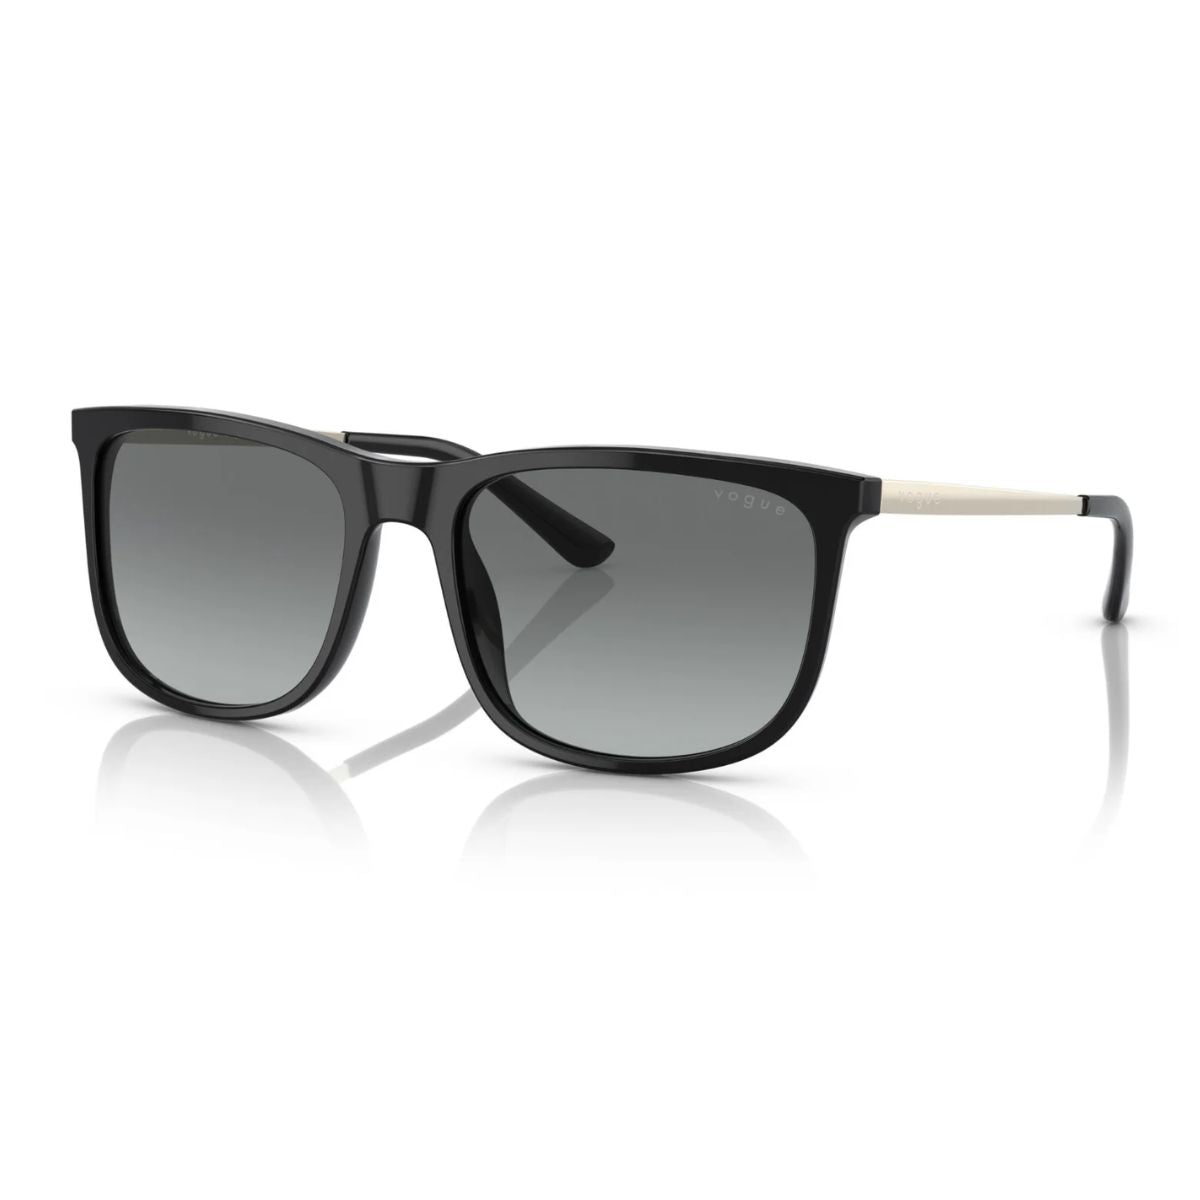 "Shop Vogue VO 5567 238613 black sunglasses for women at Optorium Eyewear, offering stylish UV protection goggles."